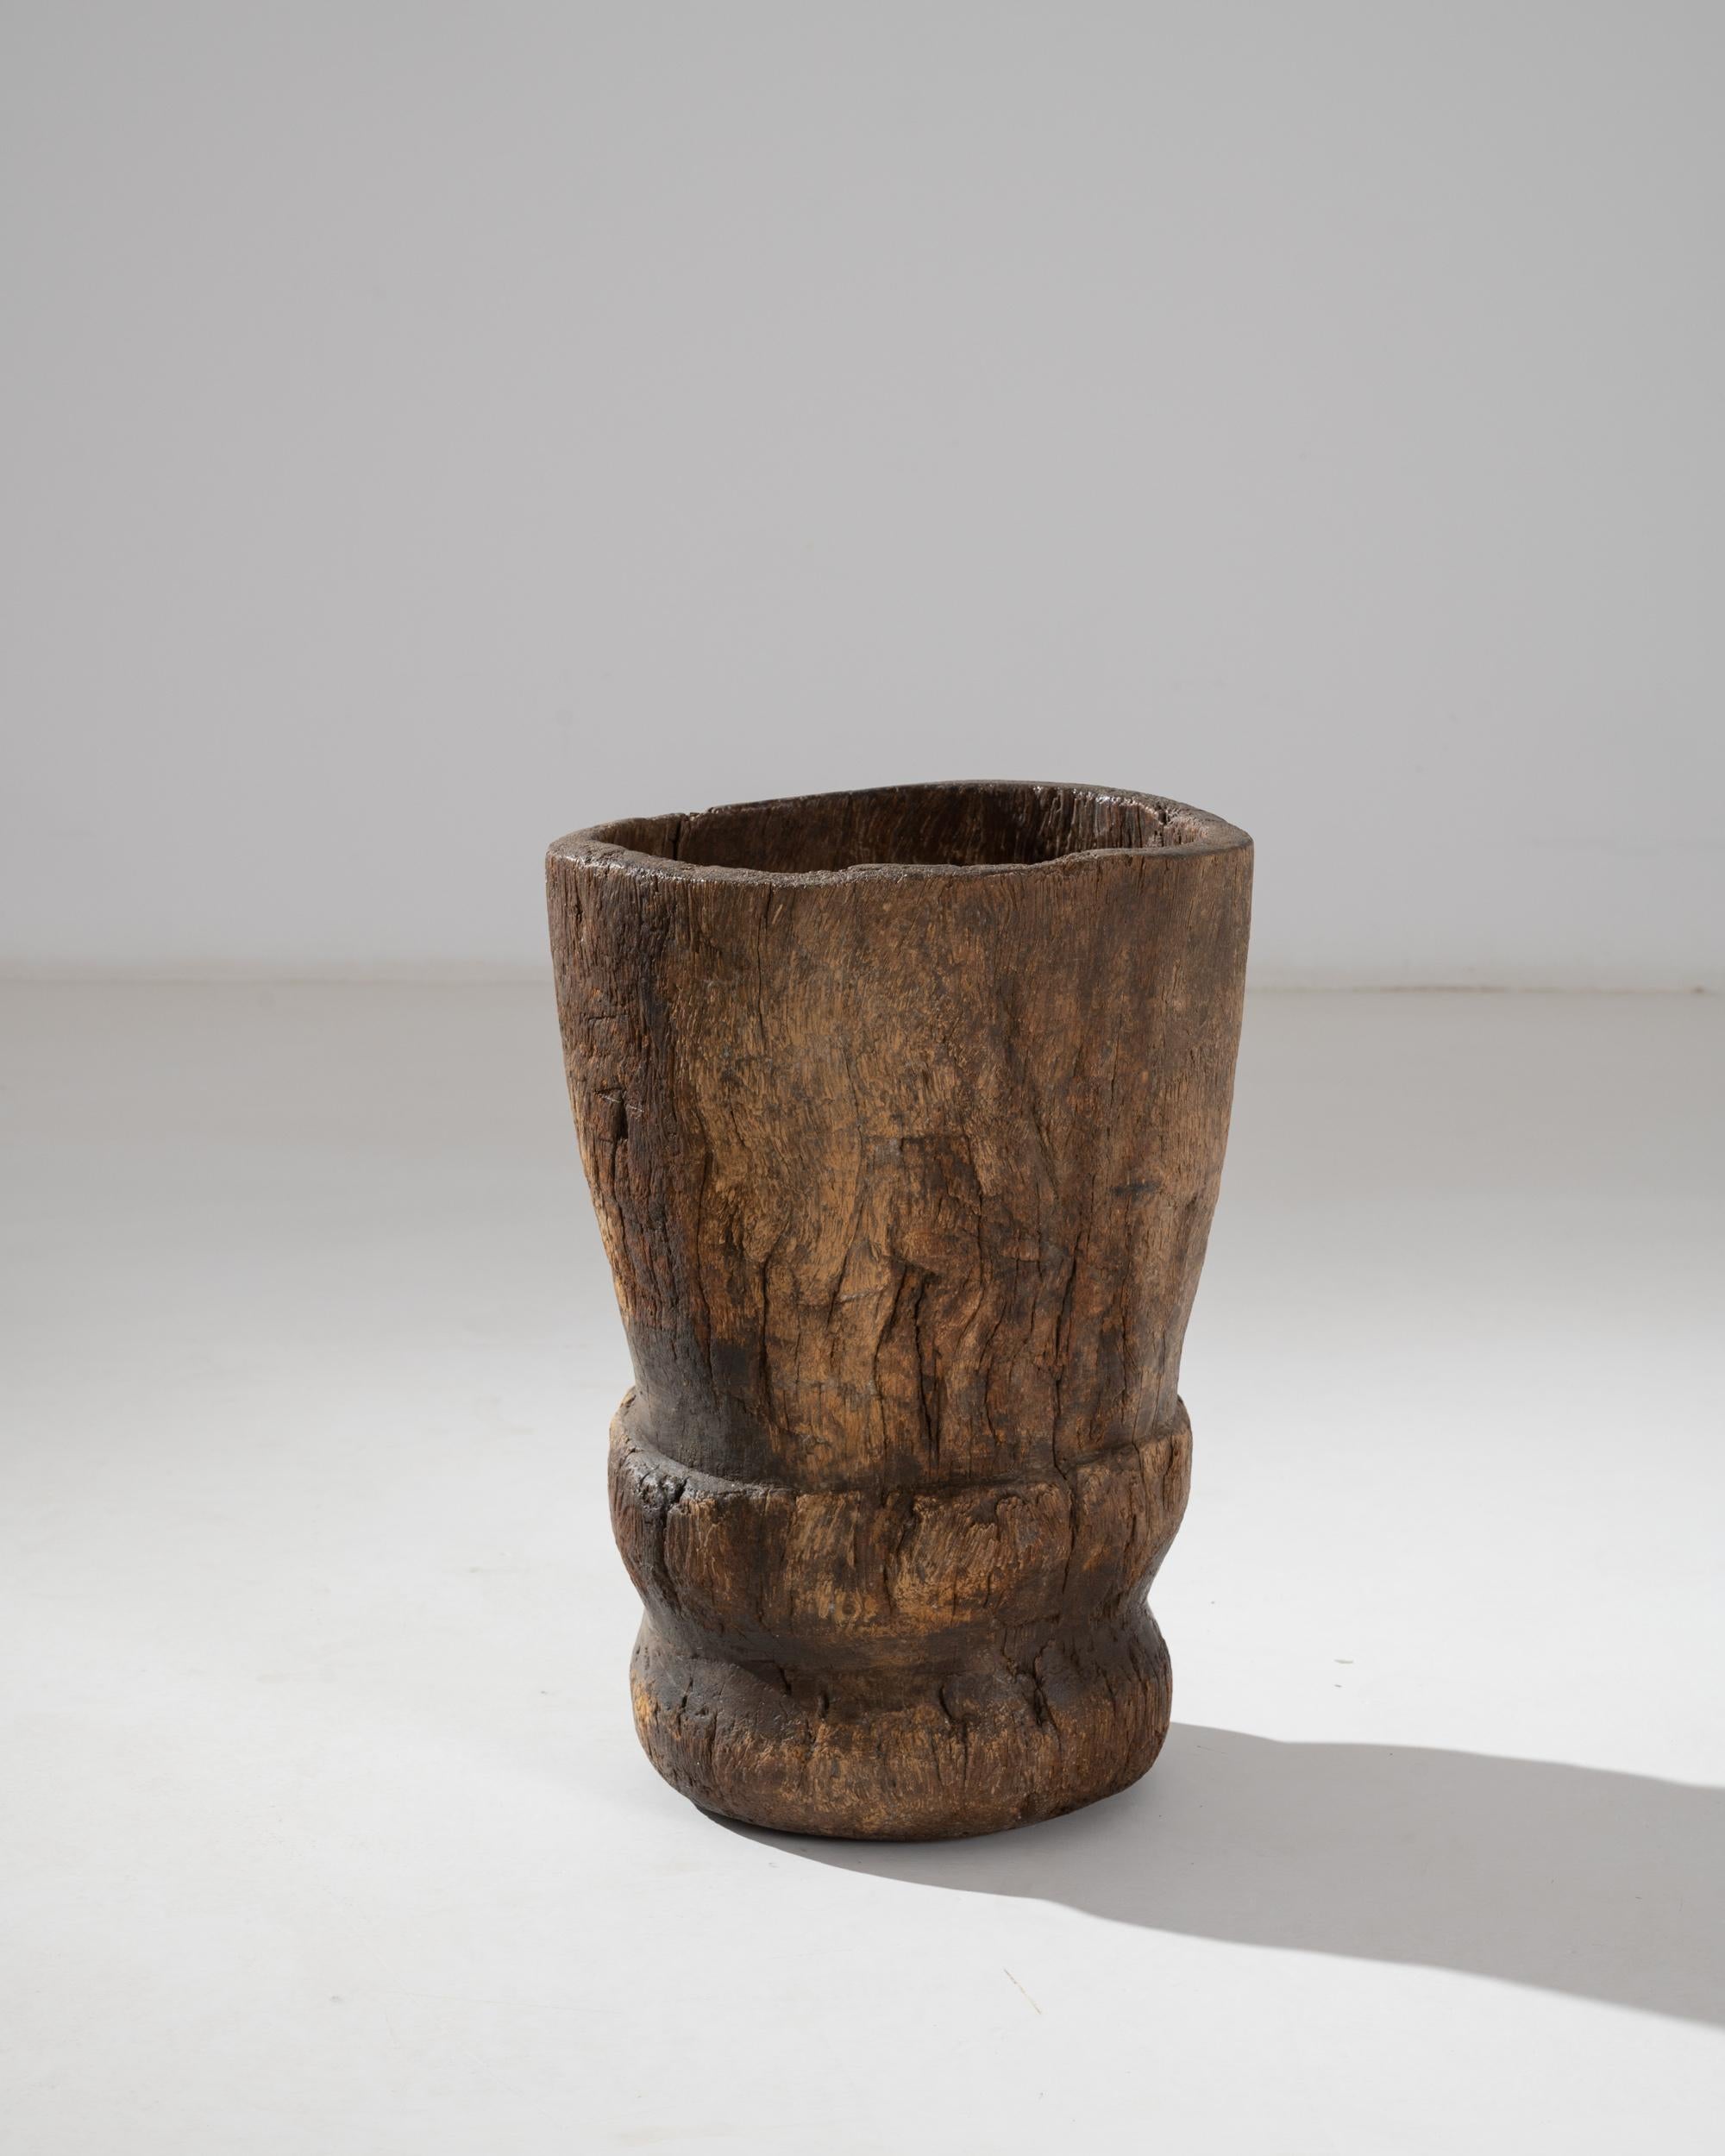 Rustic 19th Century African Wooden Mortar